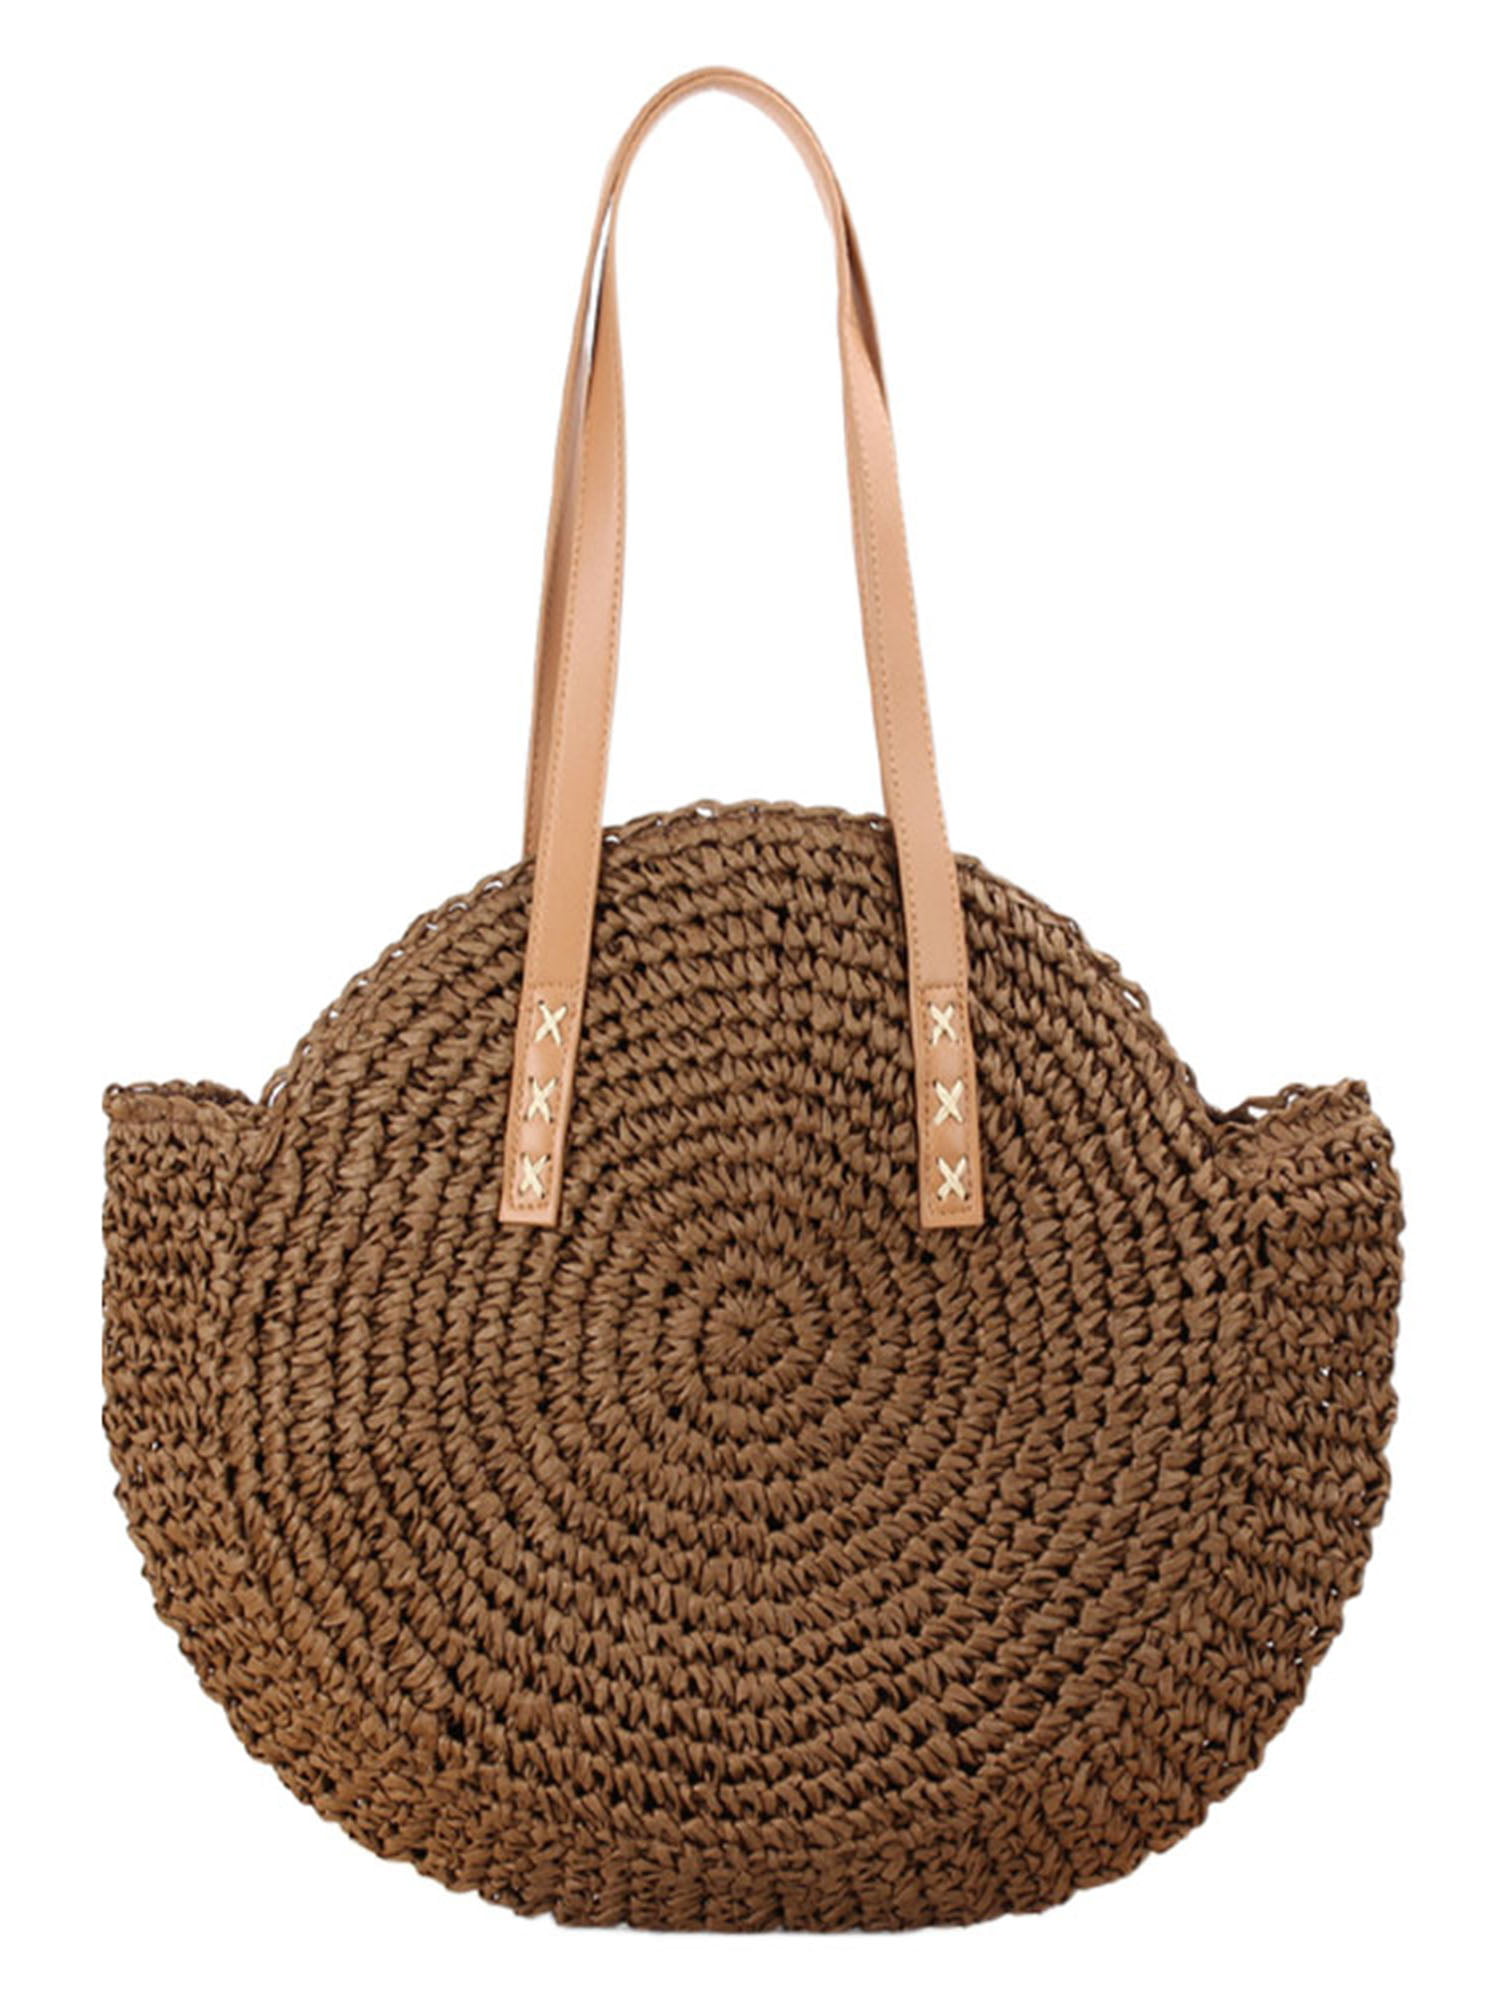 Chic Chic Large Straw Crossbody Bag Woven Straw Shoulder 